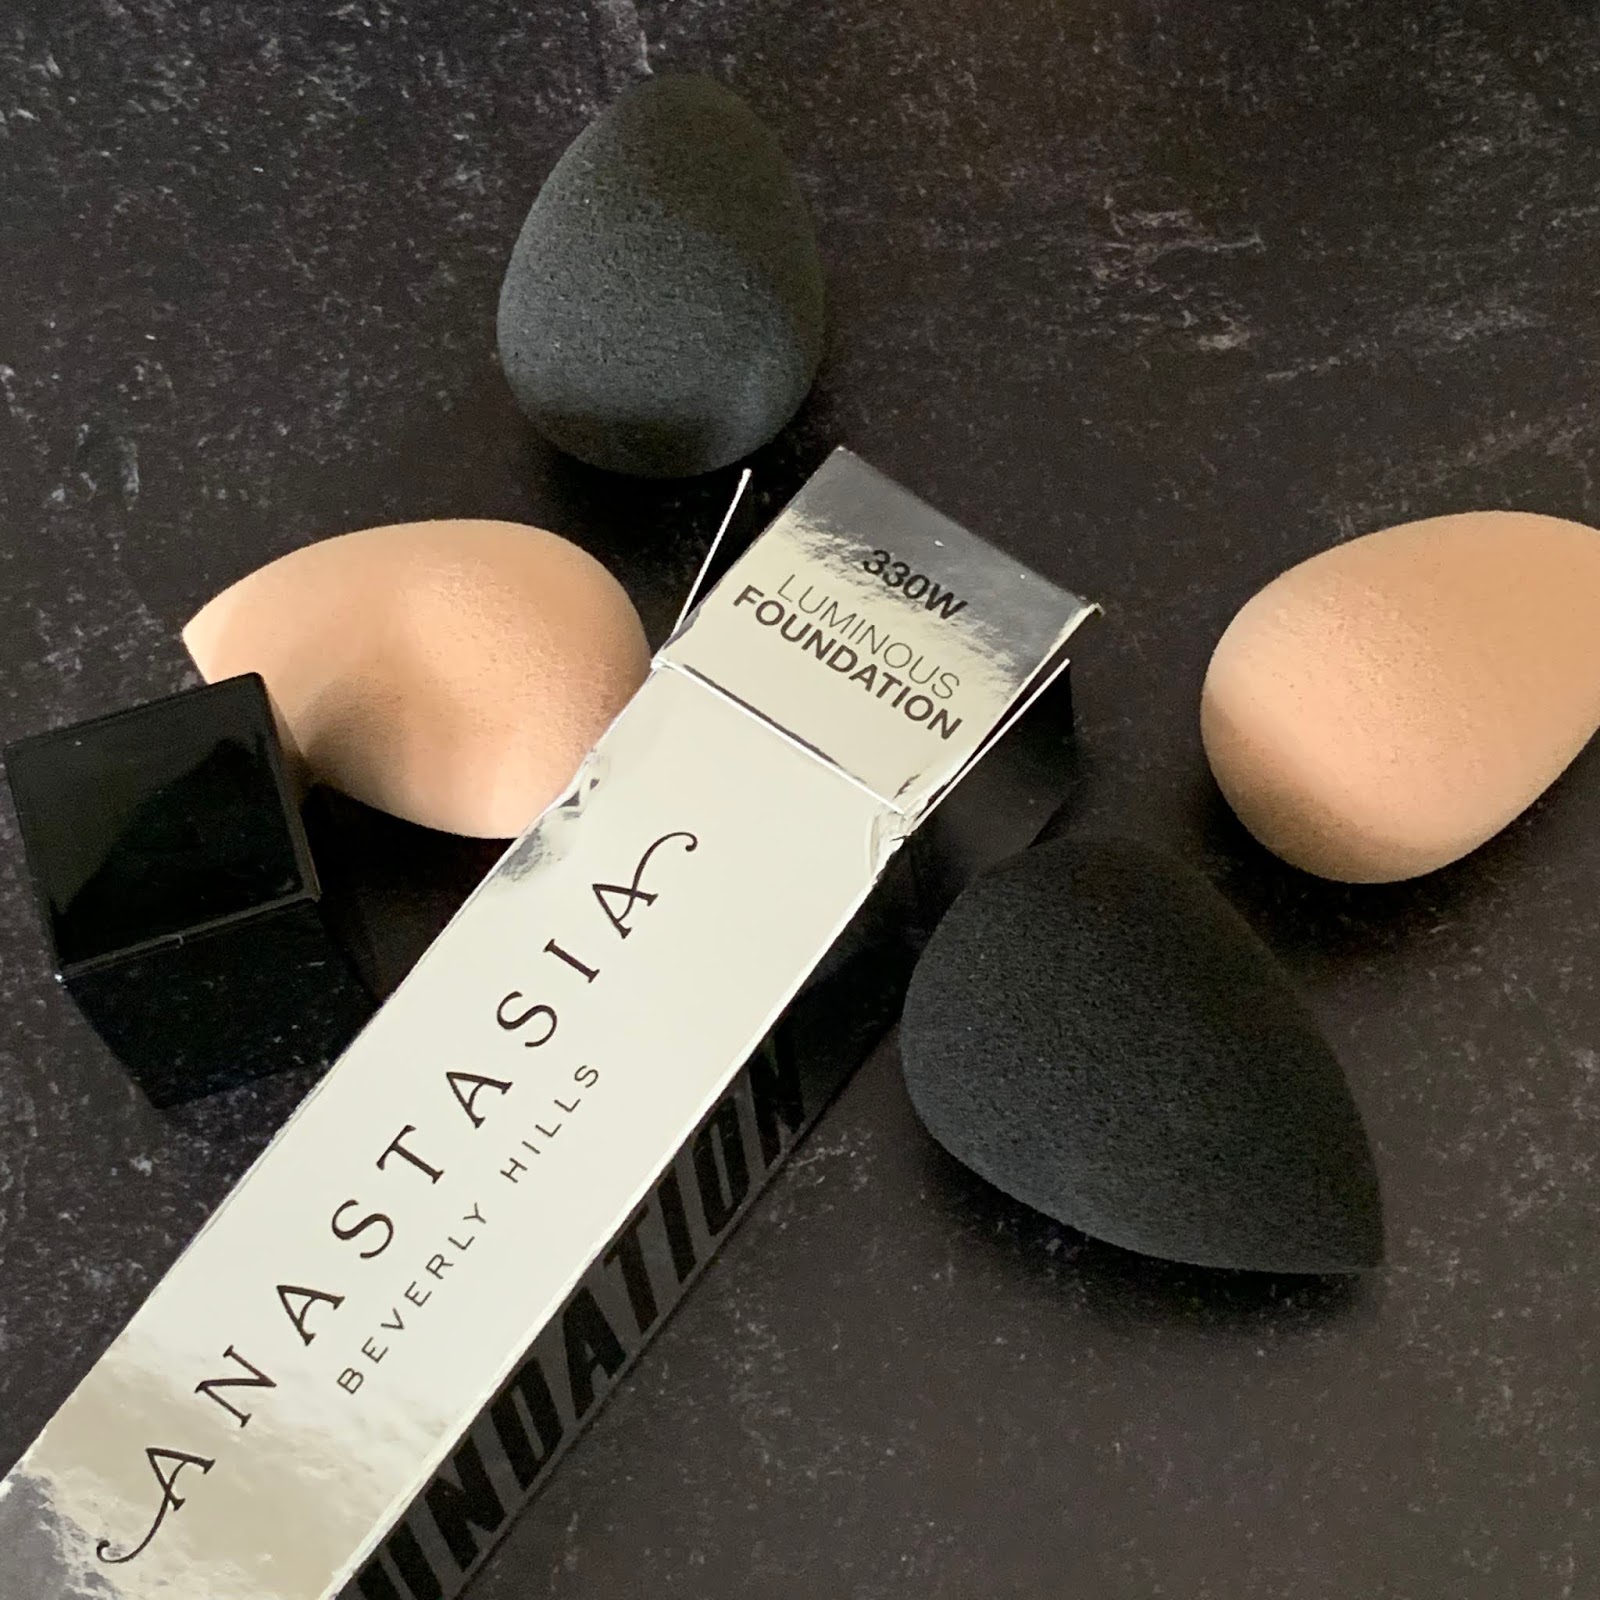 Anastasia Beverly Hills Review | Luminous Sweet 330W in Blog Very and A Foundation Swatches